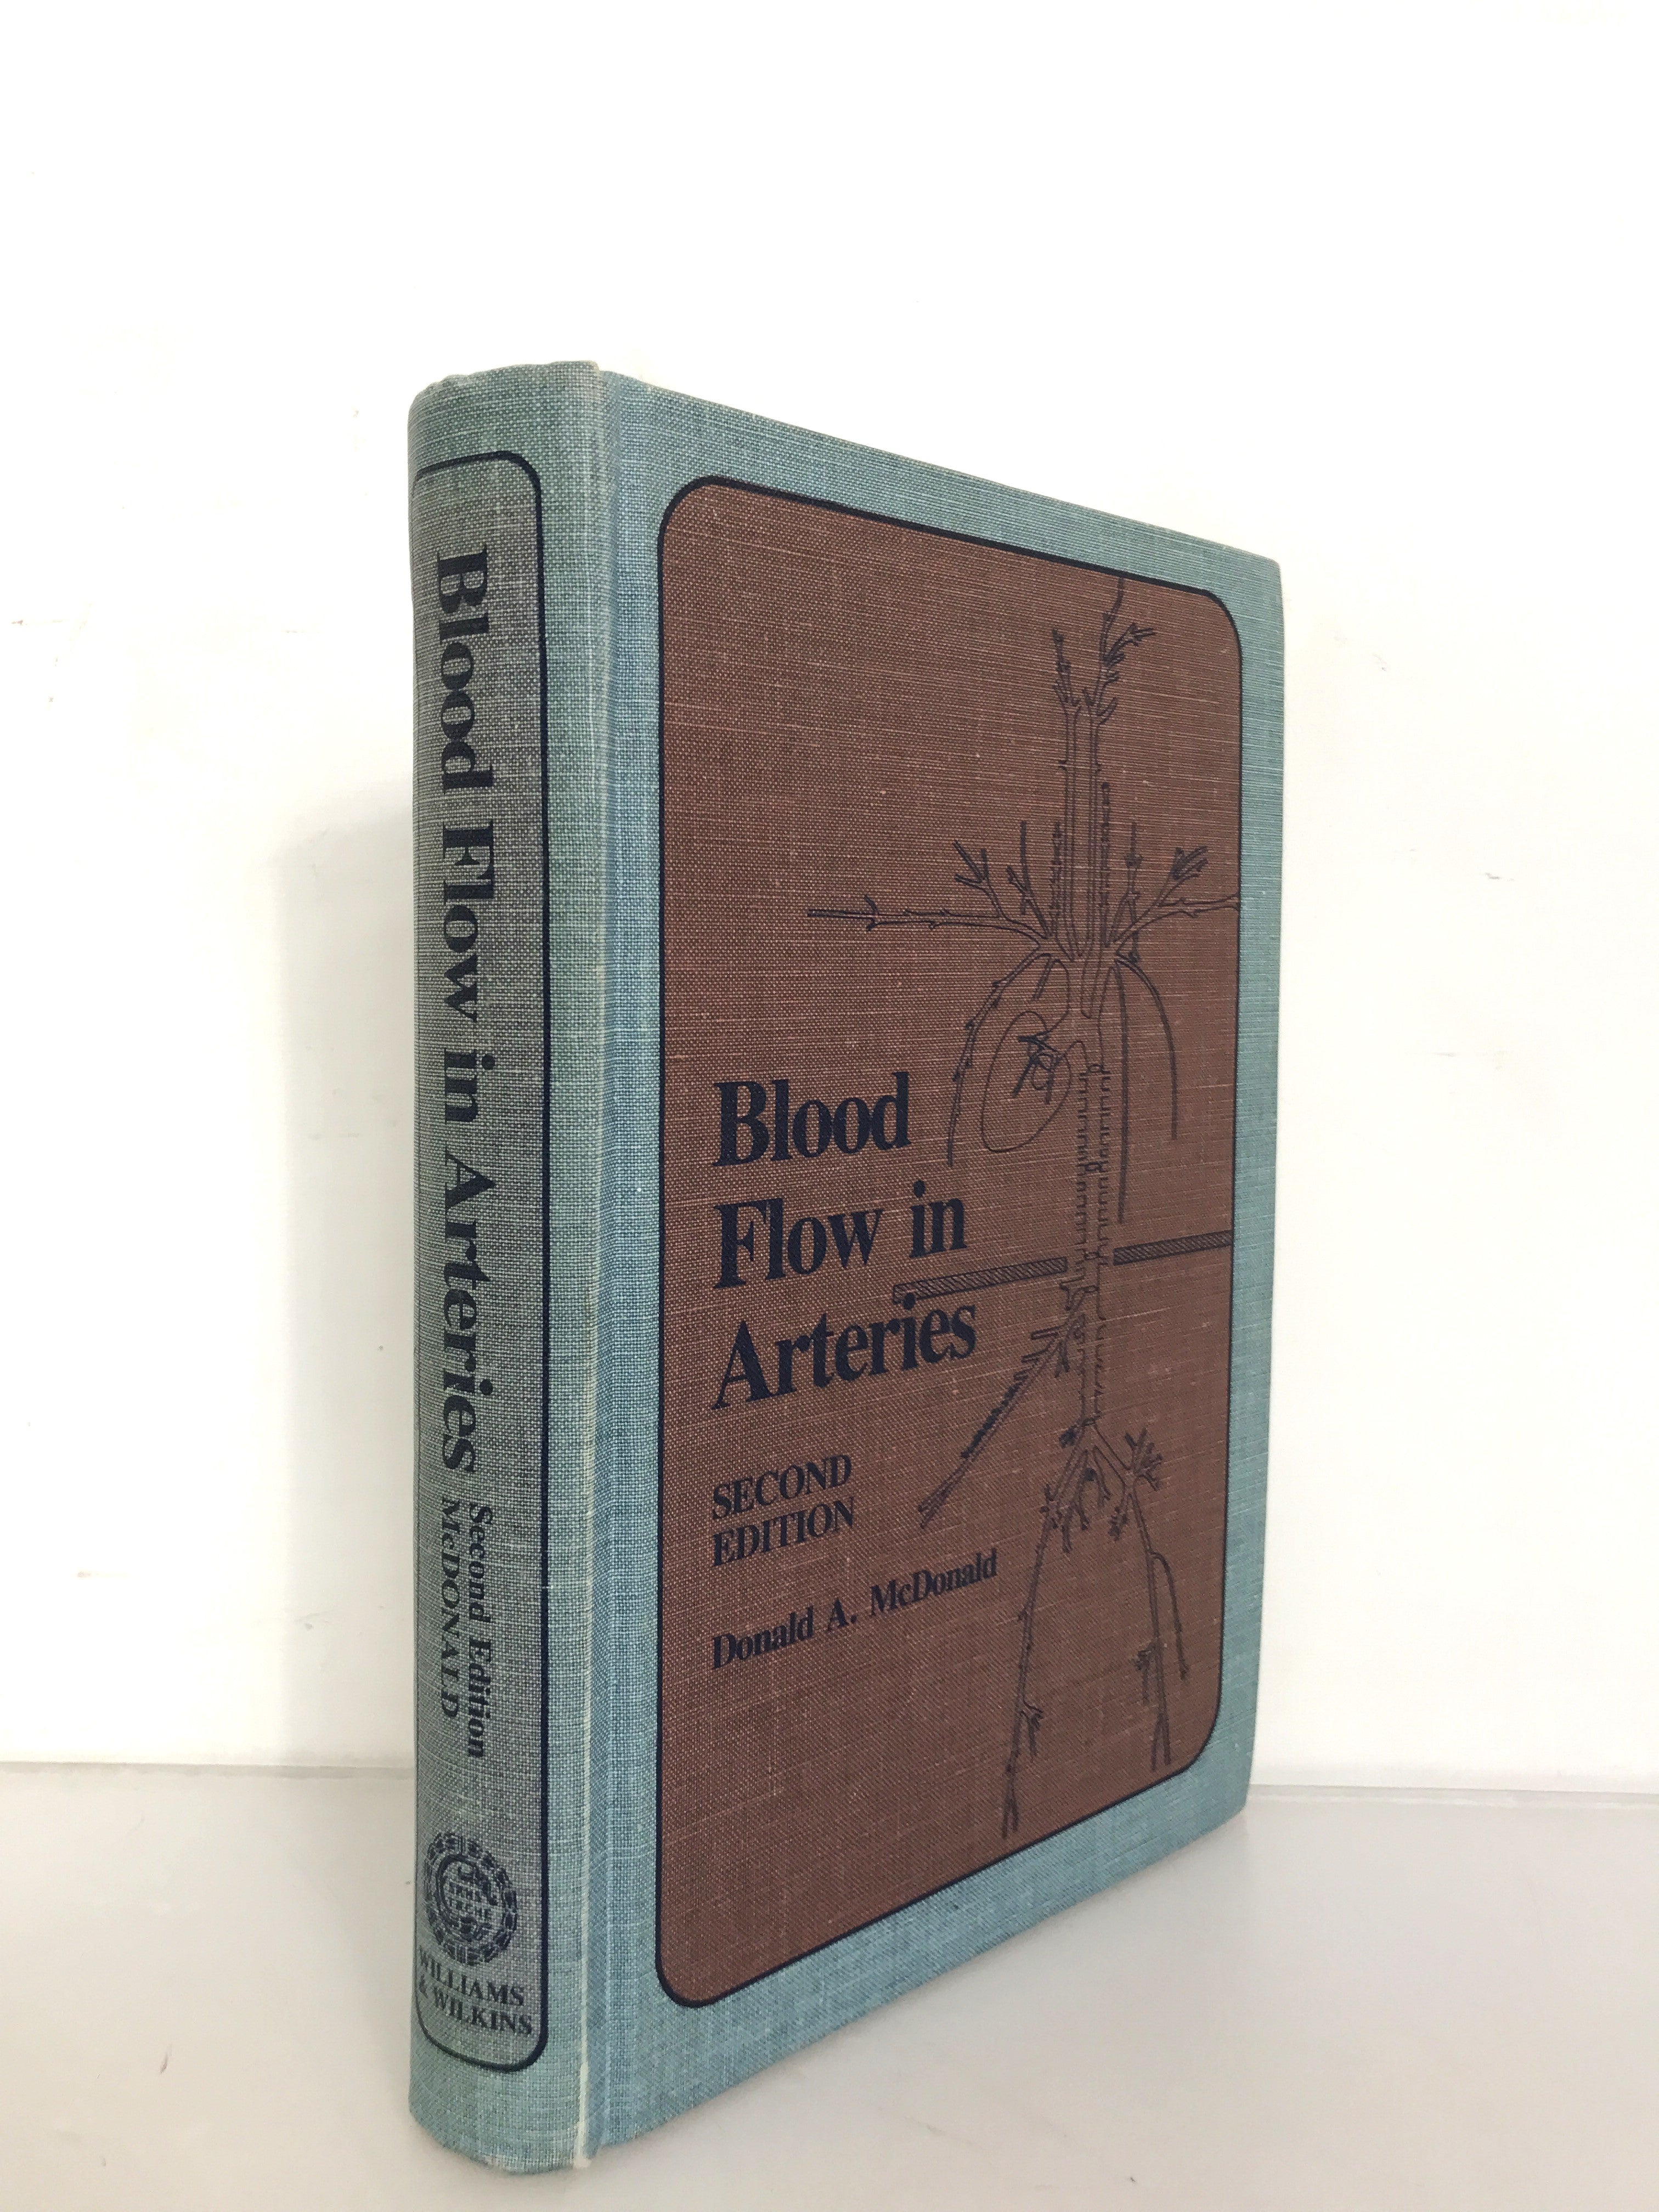 Blood Flow in Arteries Second Edition by Donald McDonald 1974 HC